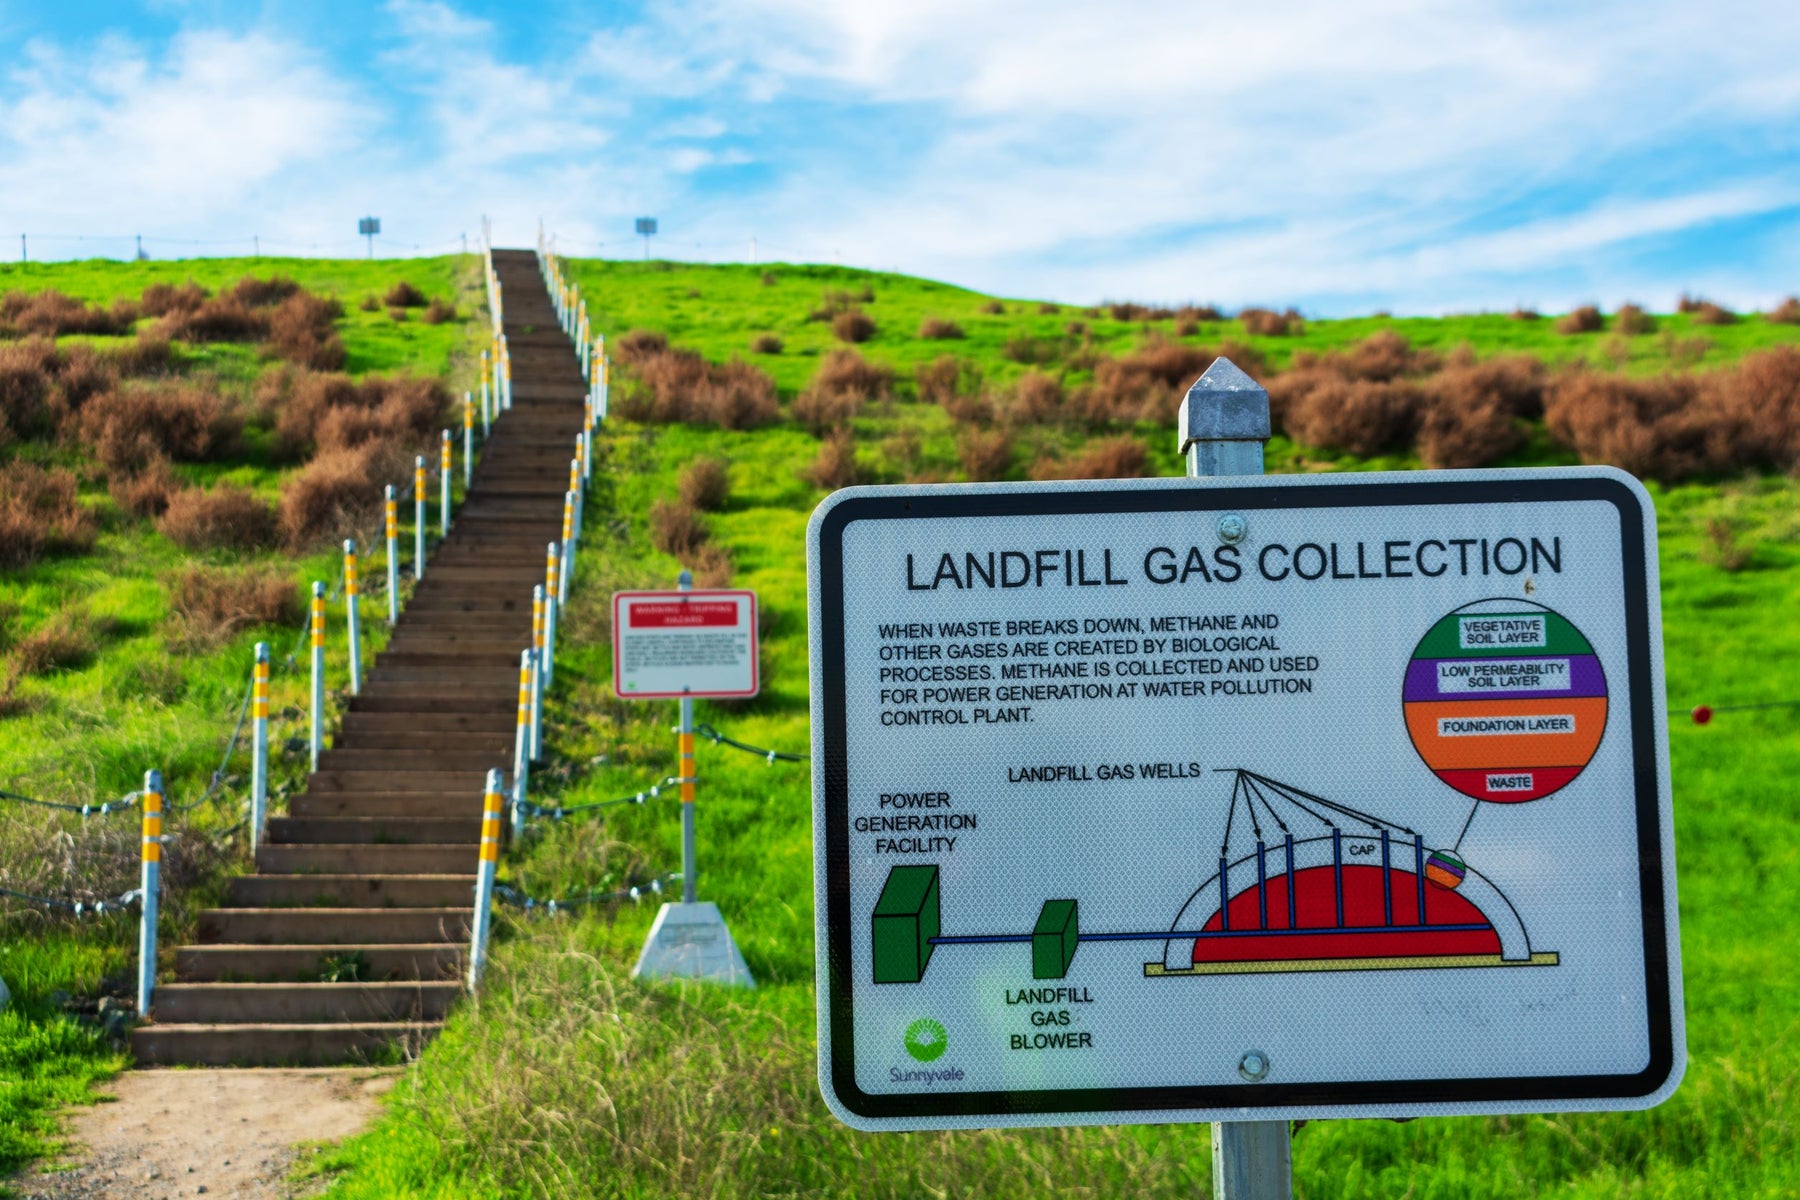 Landfill Gas Collection Isn't Just Smart, It's Required